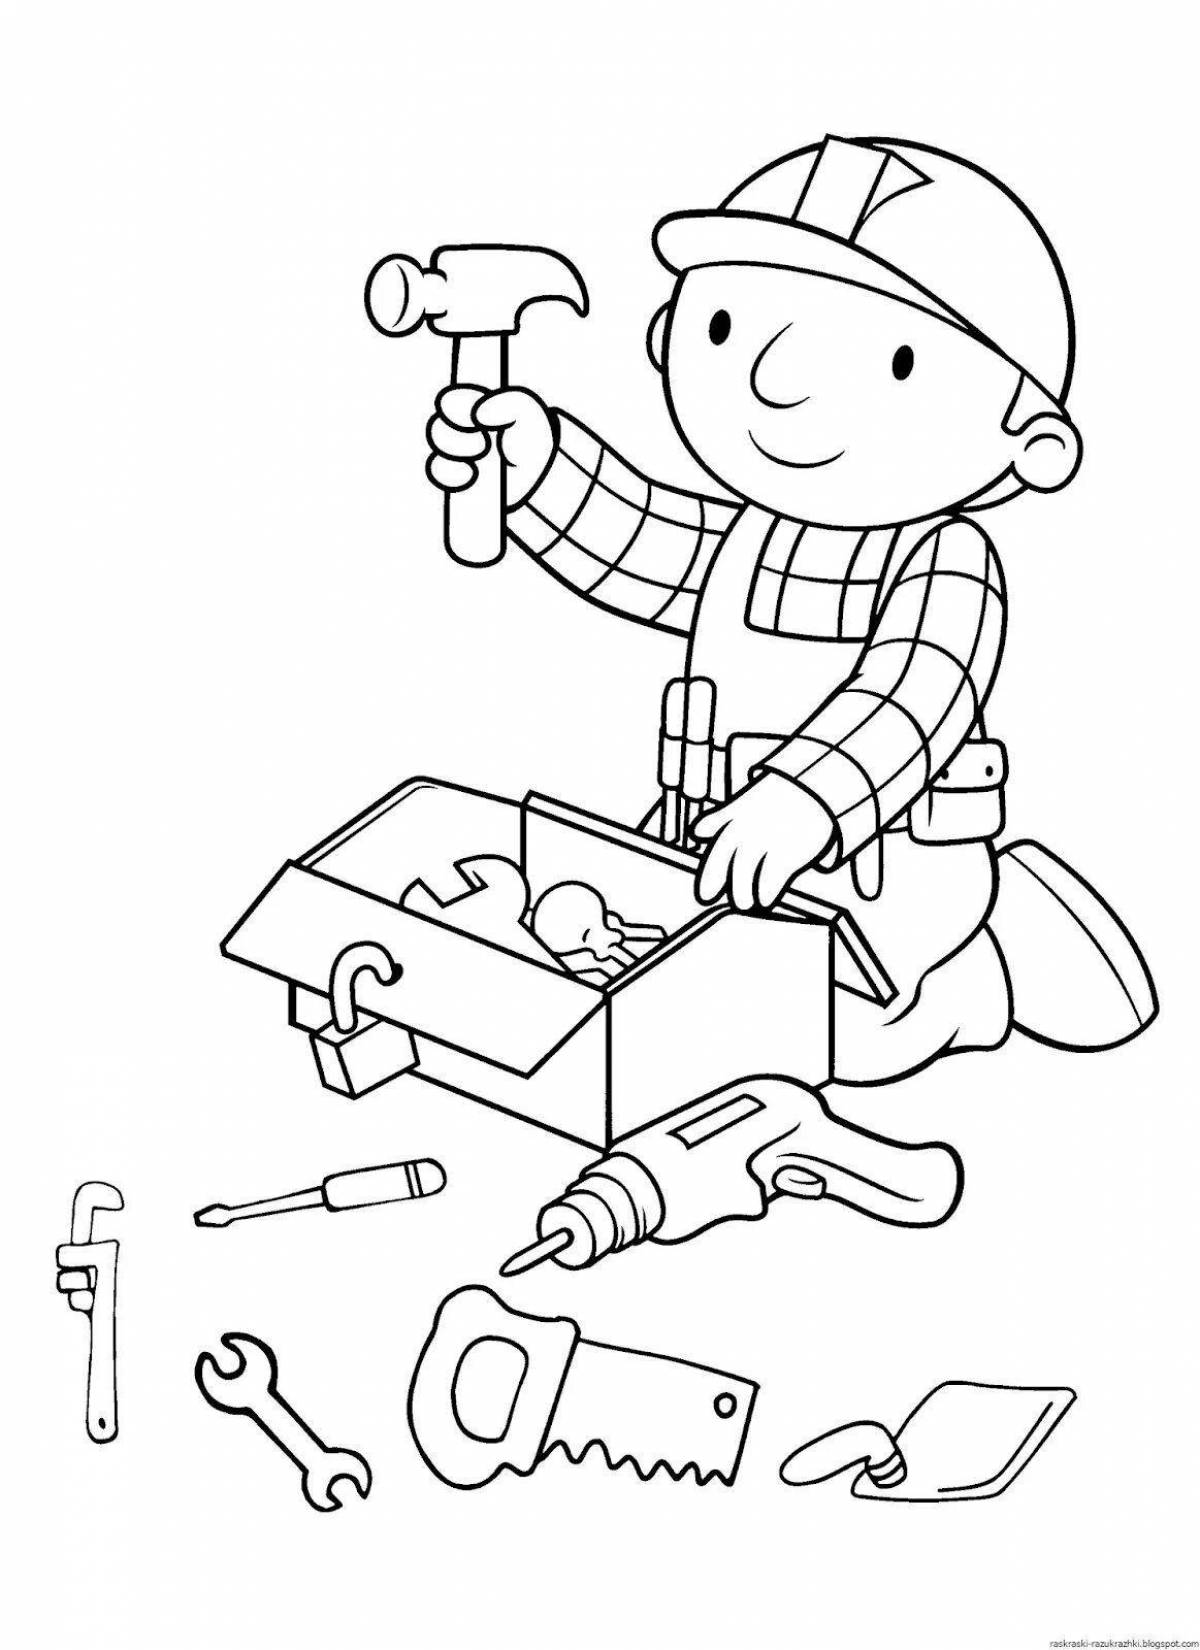 Coloring book stimulating construction professions